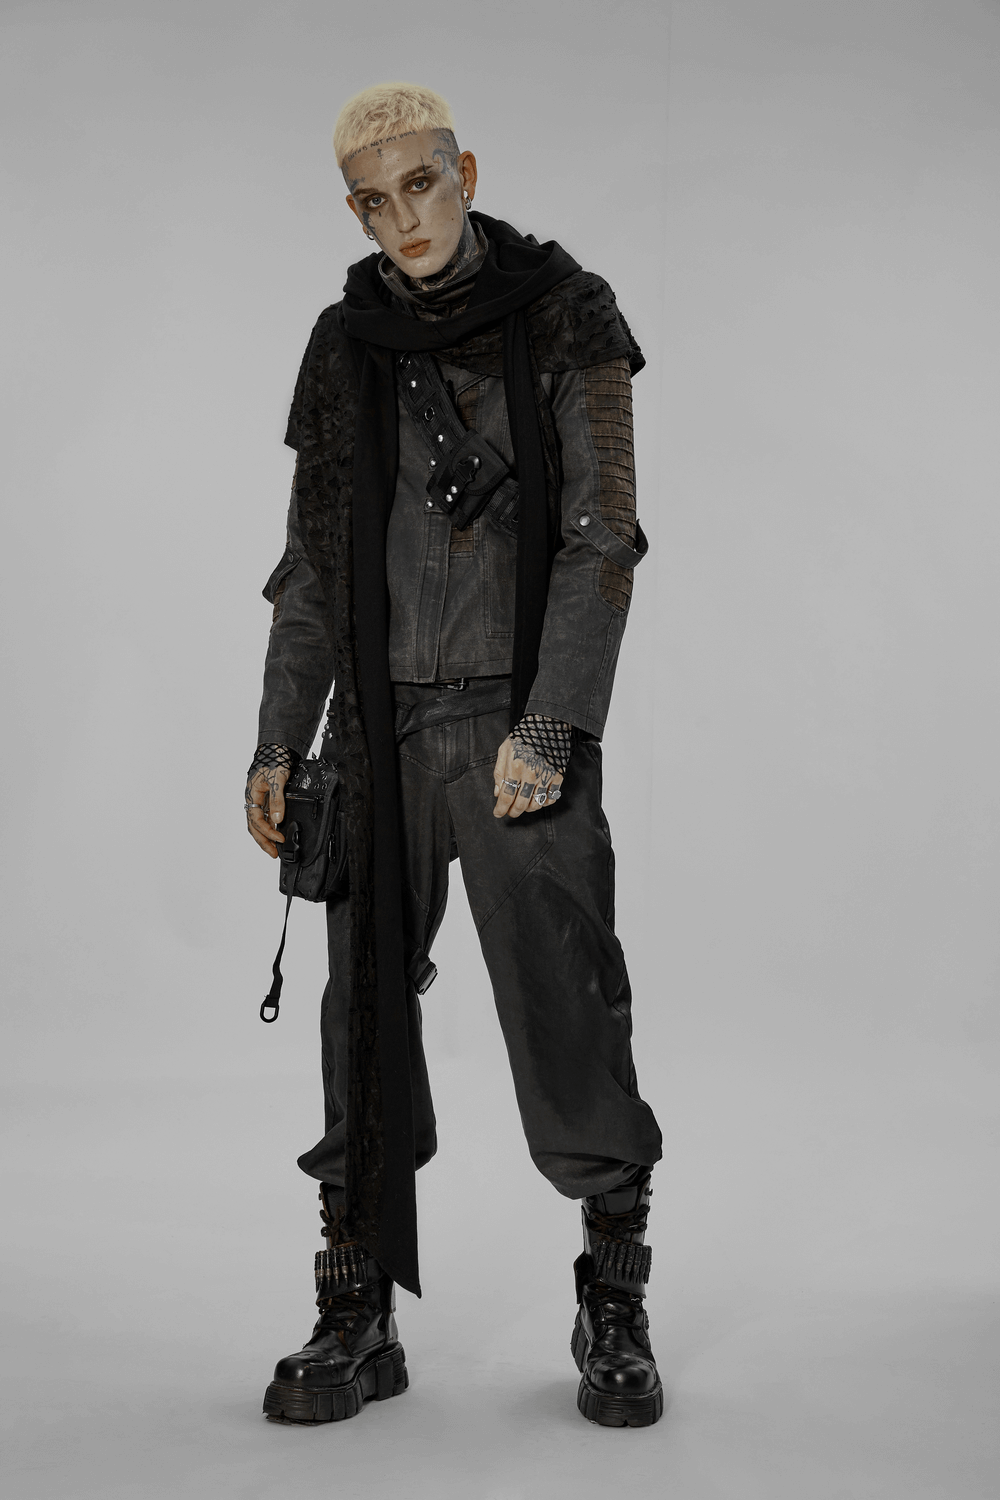 Male Deconstructed Knit Hooded Cape with Long Scarf